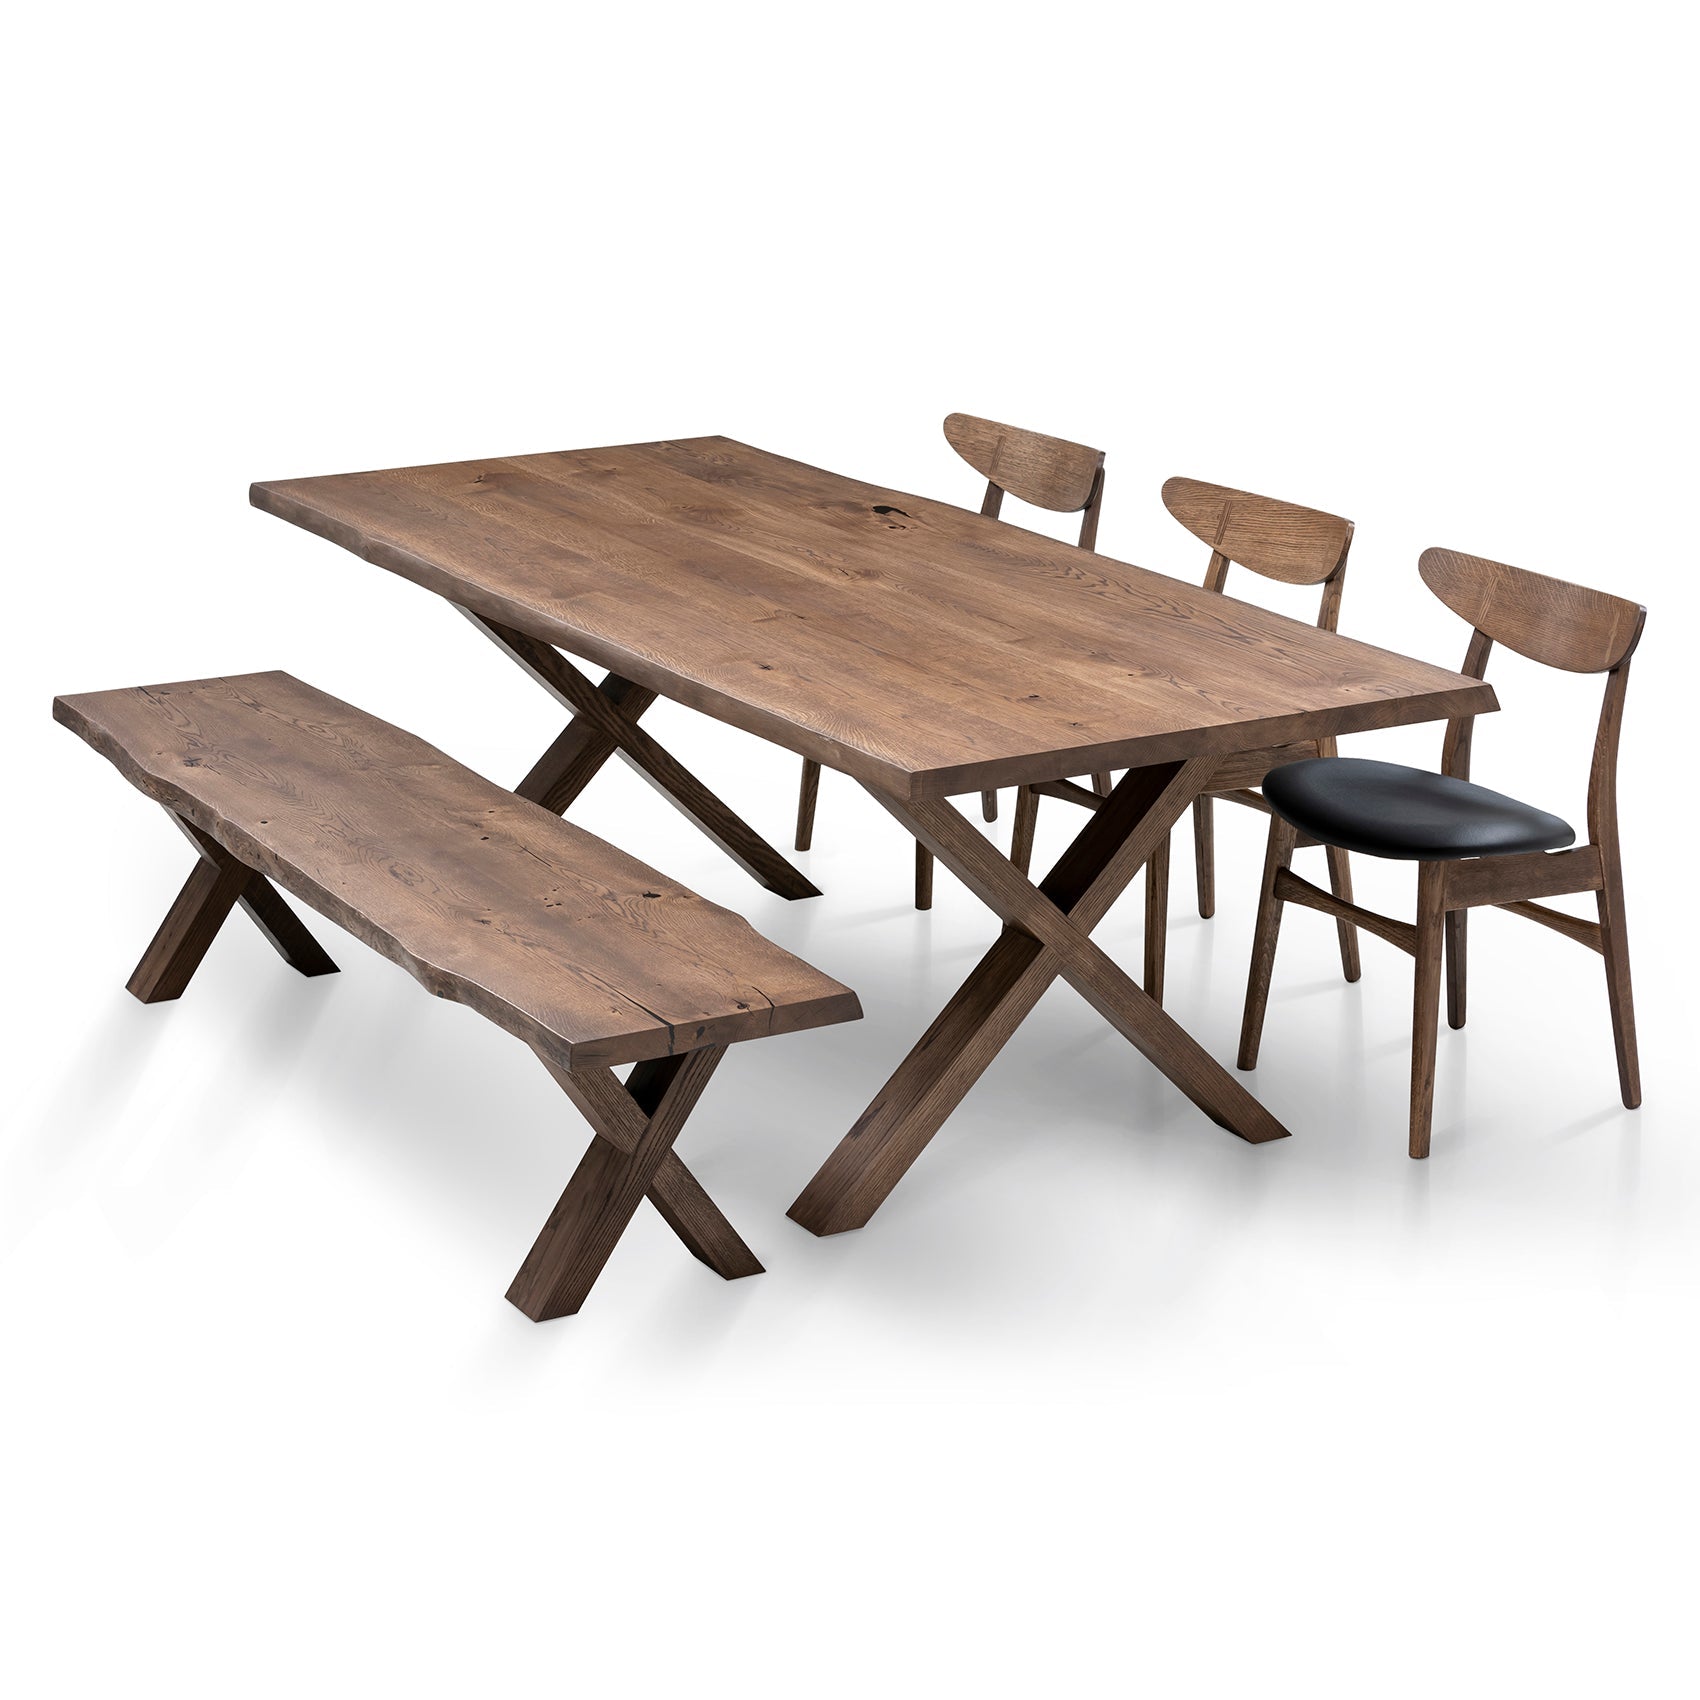 Solid wood extending dining table